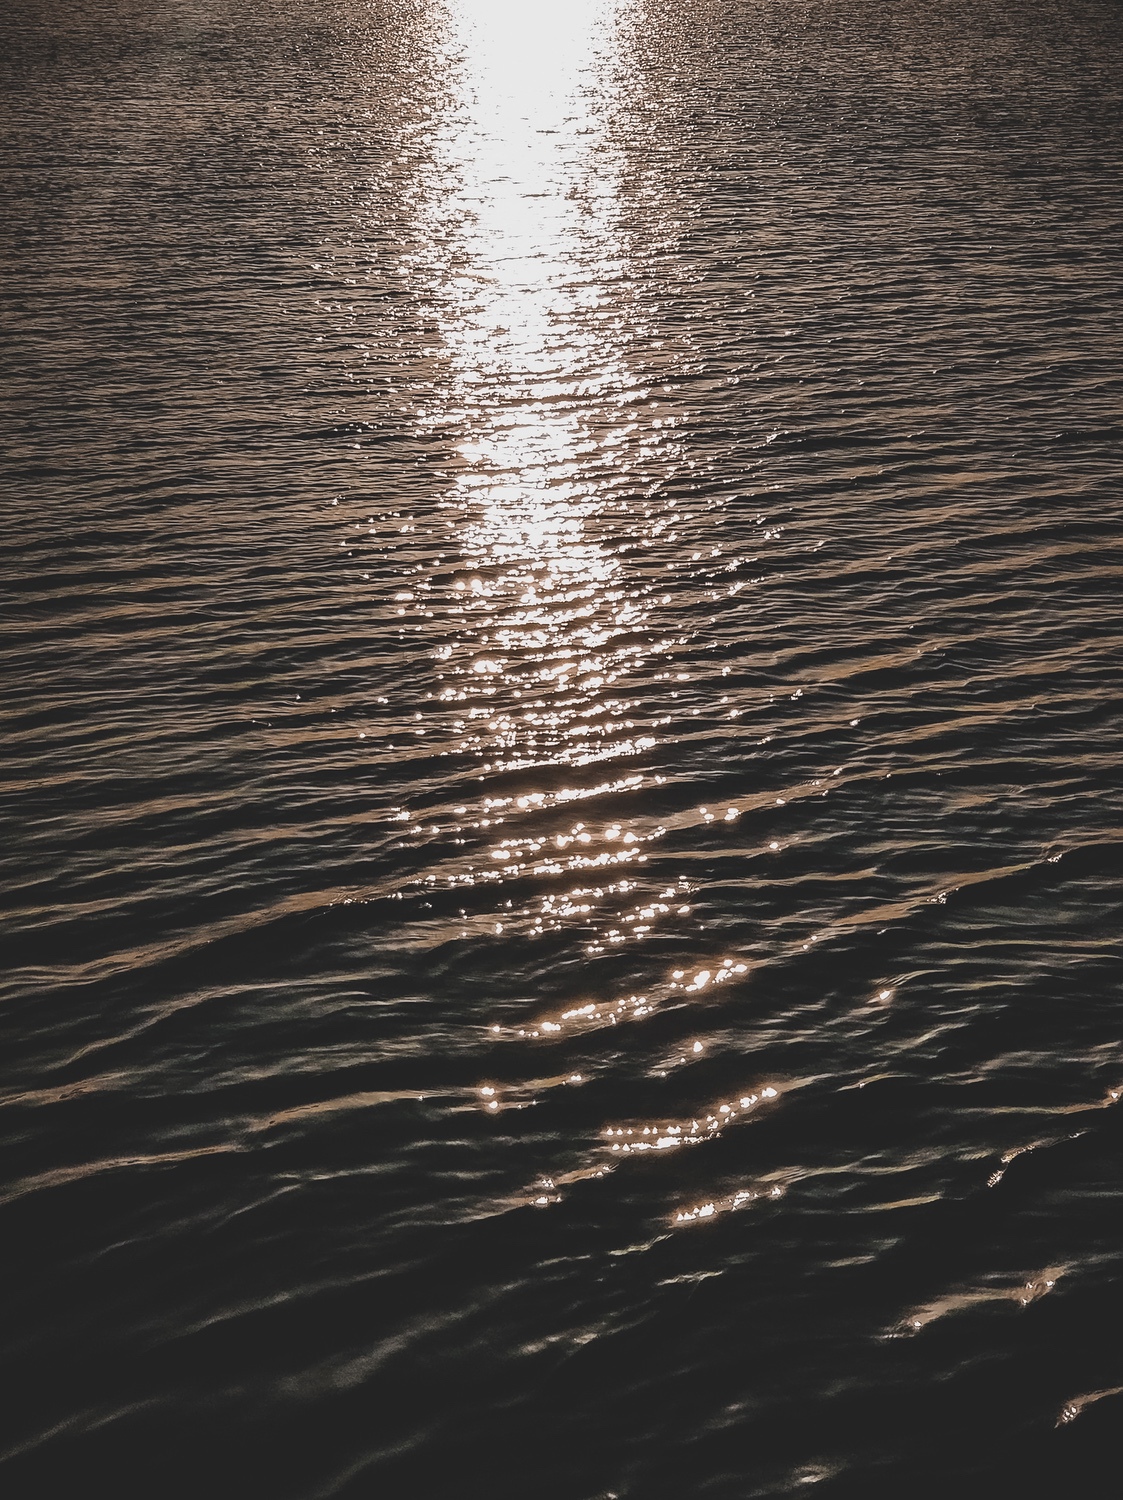 Sun-kissed ripples on the water